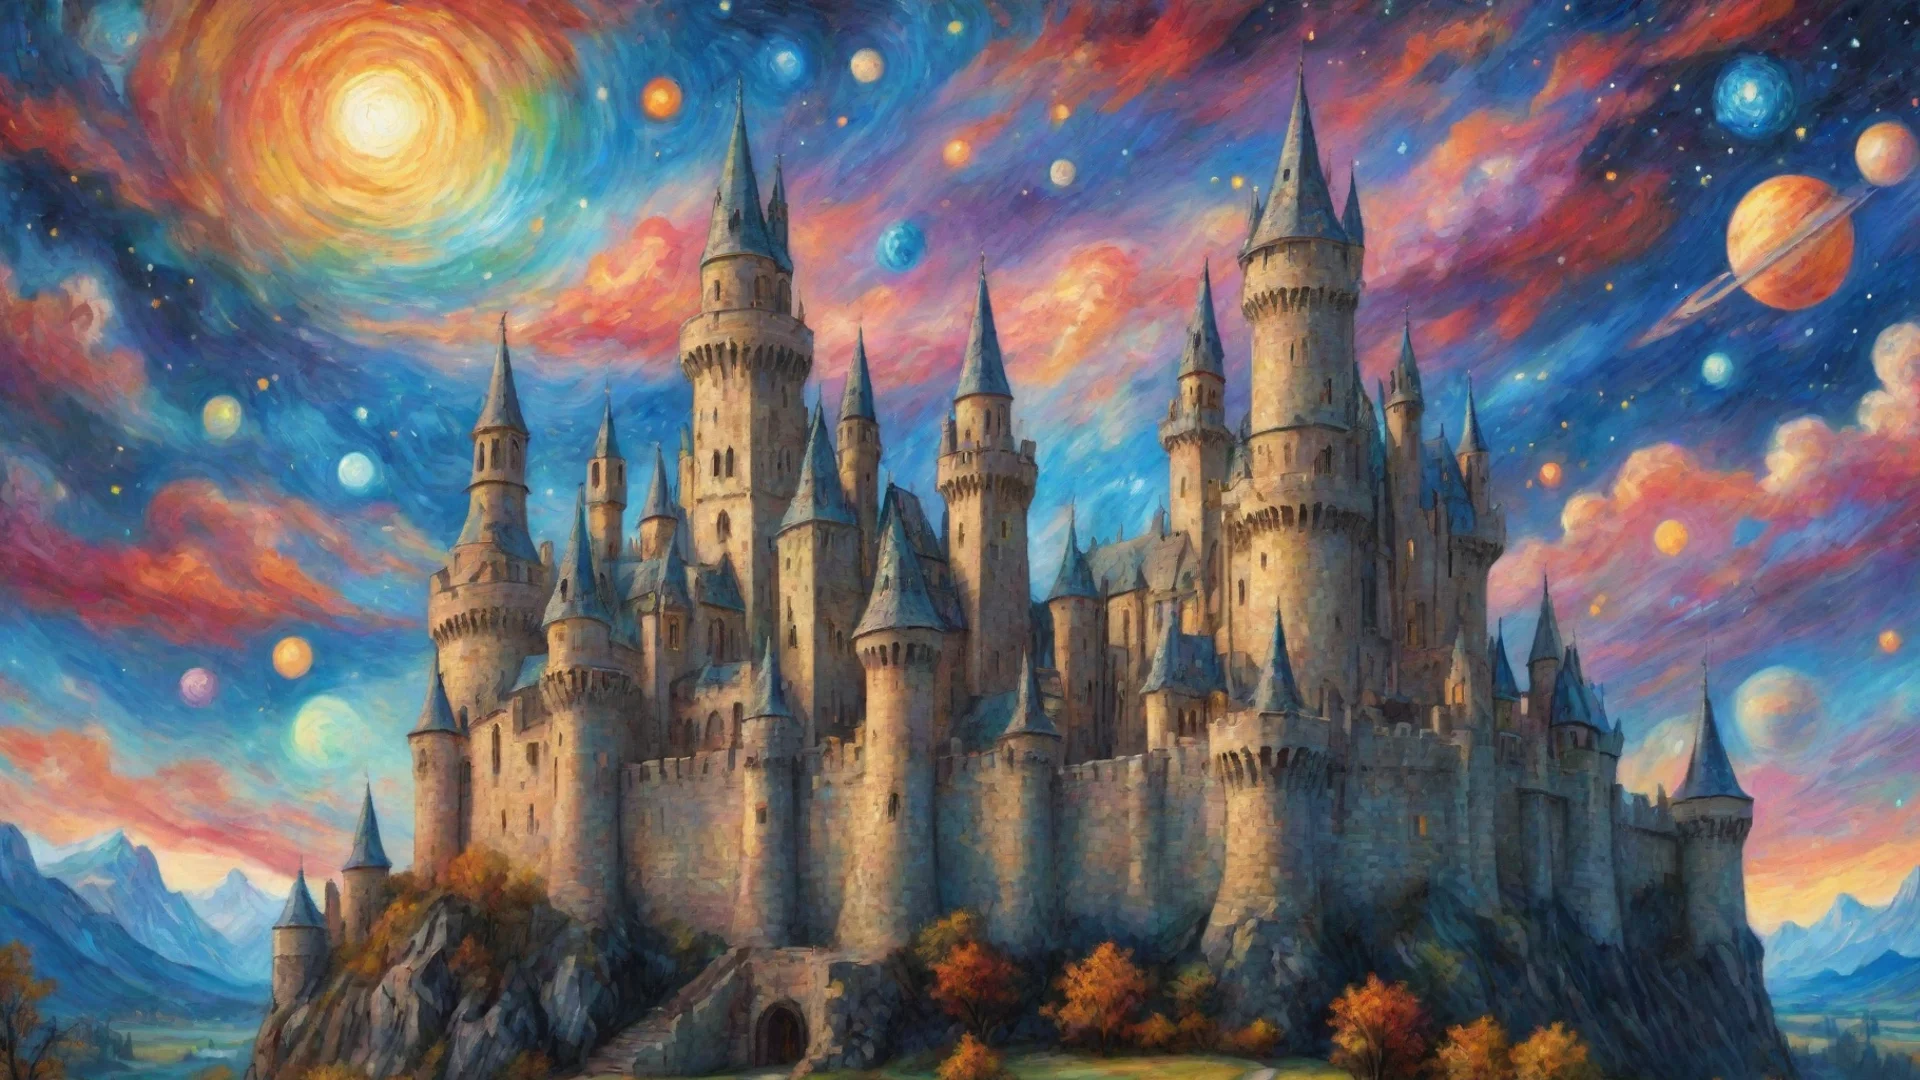 epic castle with colorful artistic sky planets van gogh style detailed hd asthetic castle wide